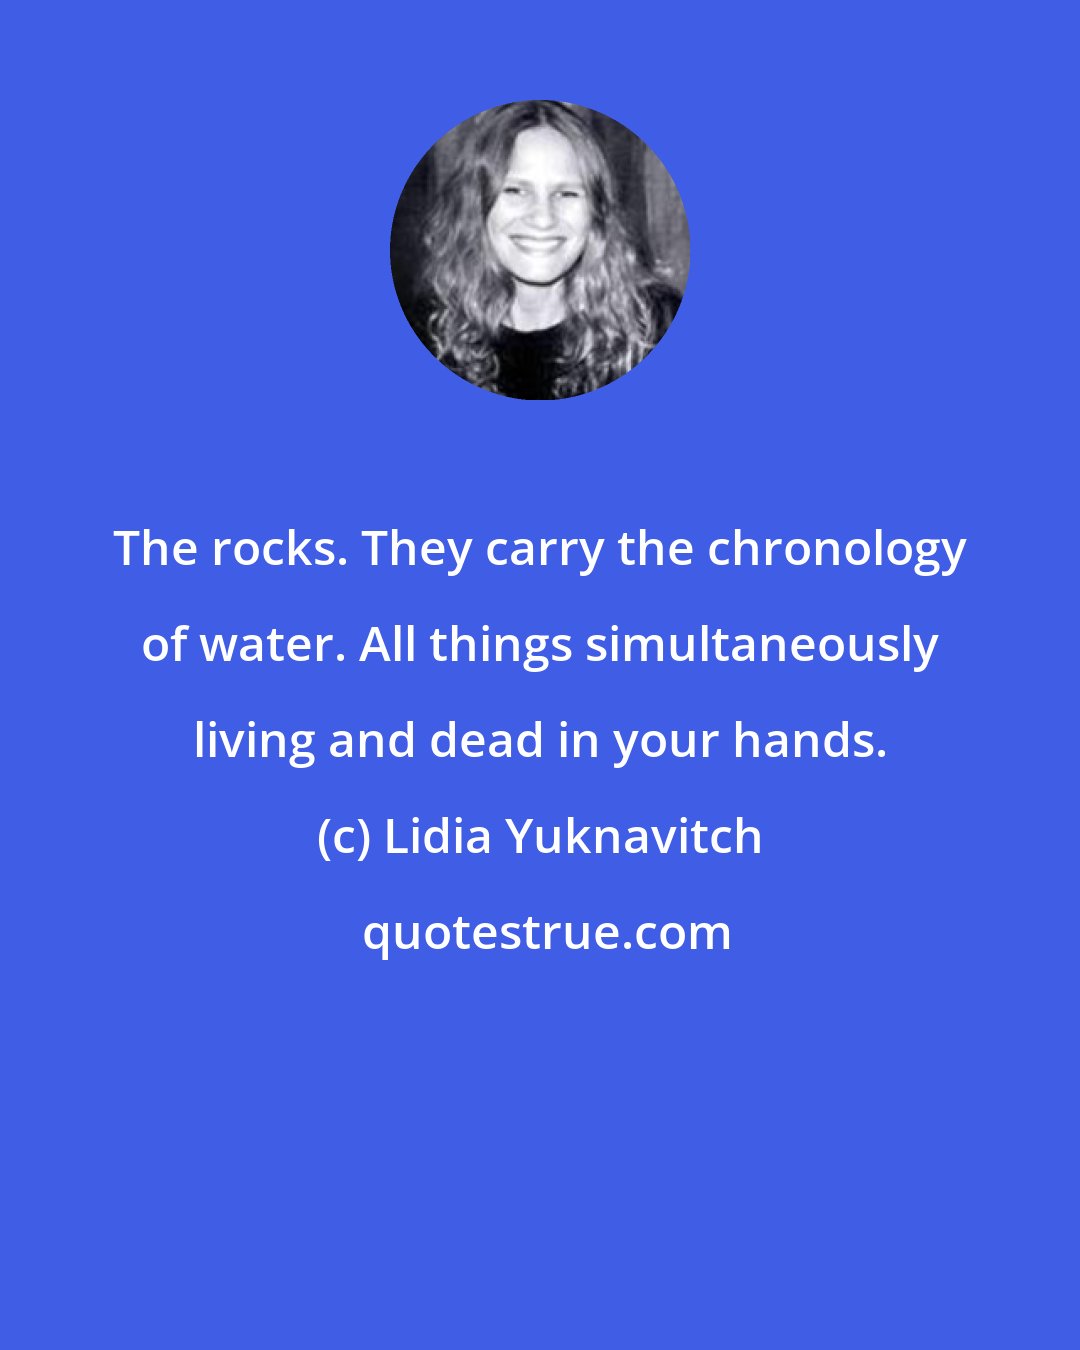 Lidia Yuknavitch: The rocks. They carry the chronology of water. All things simultaneously living and dead in your hands.